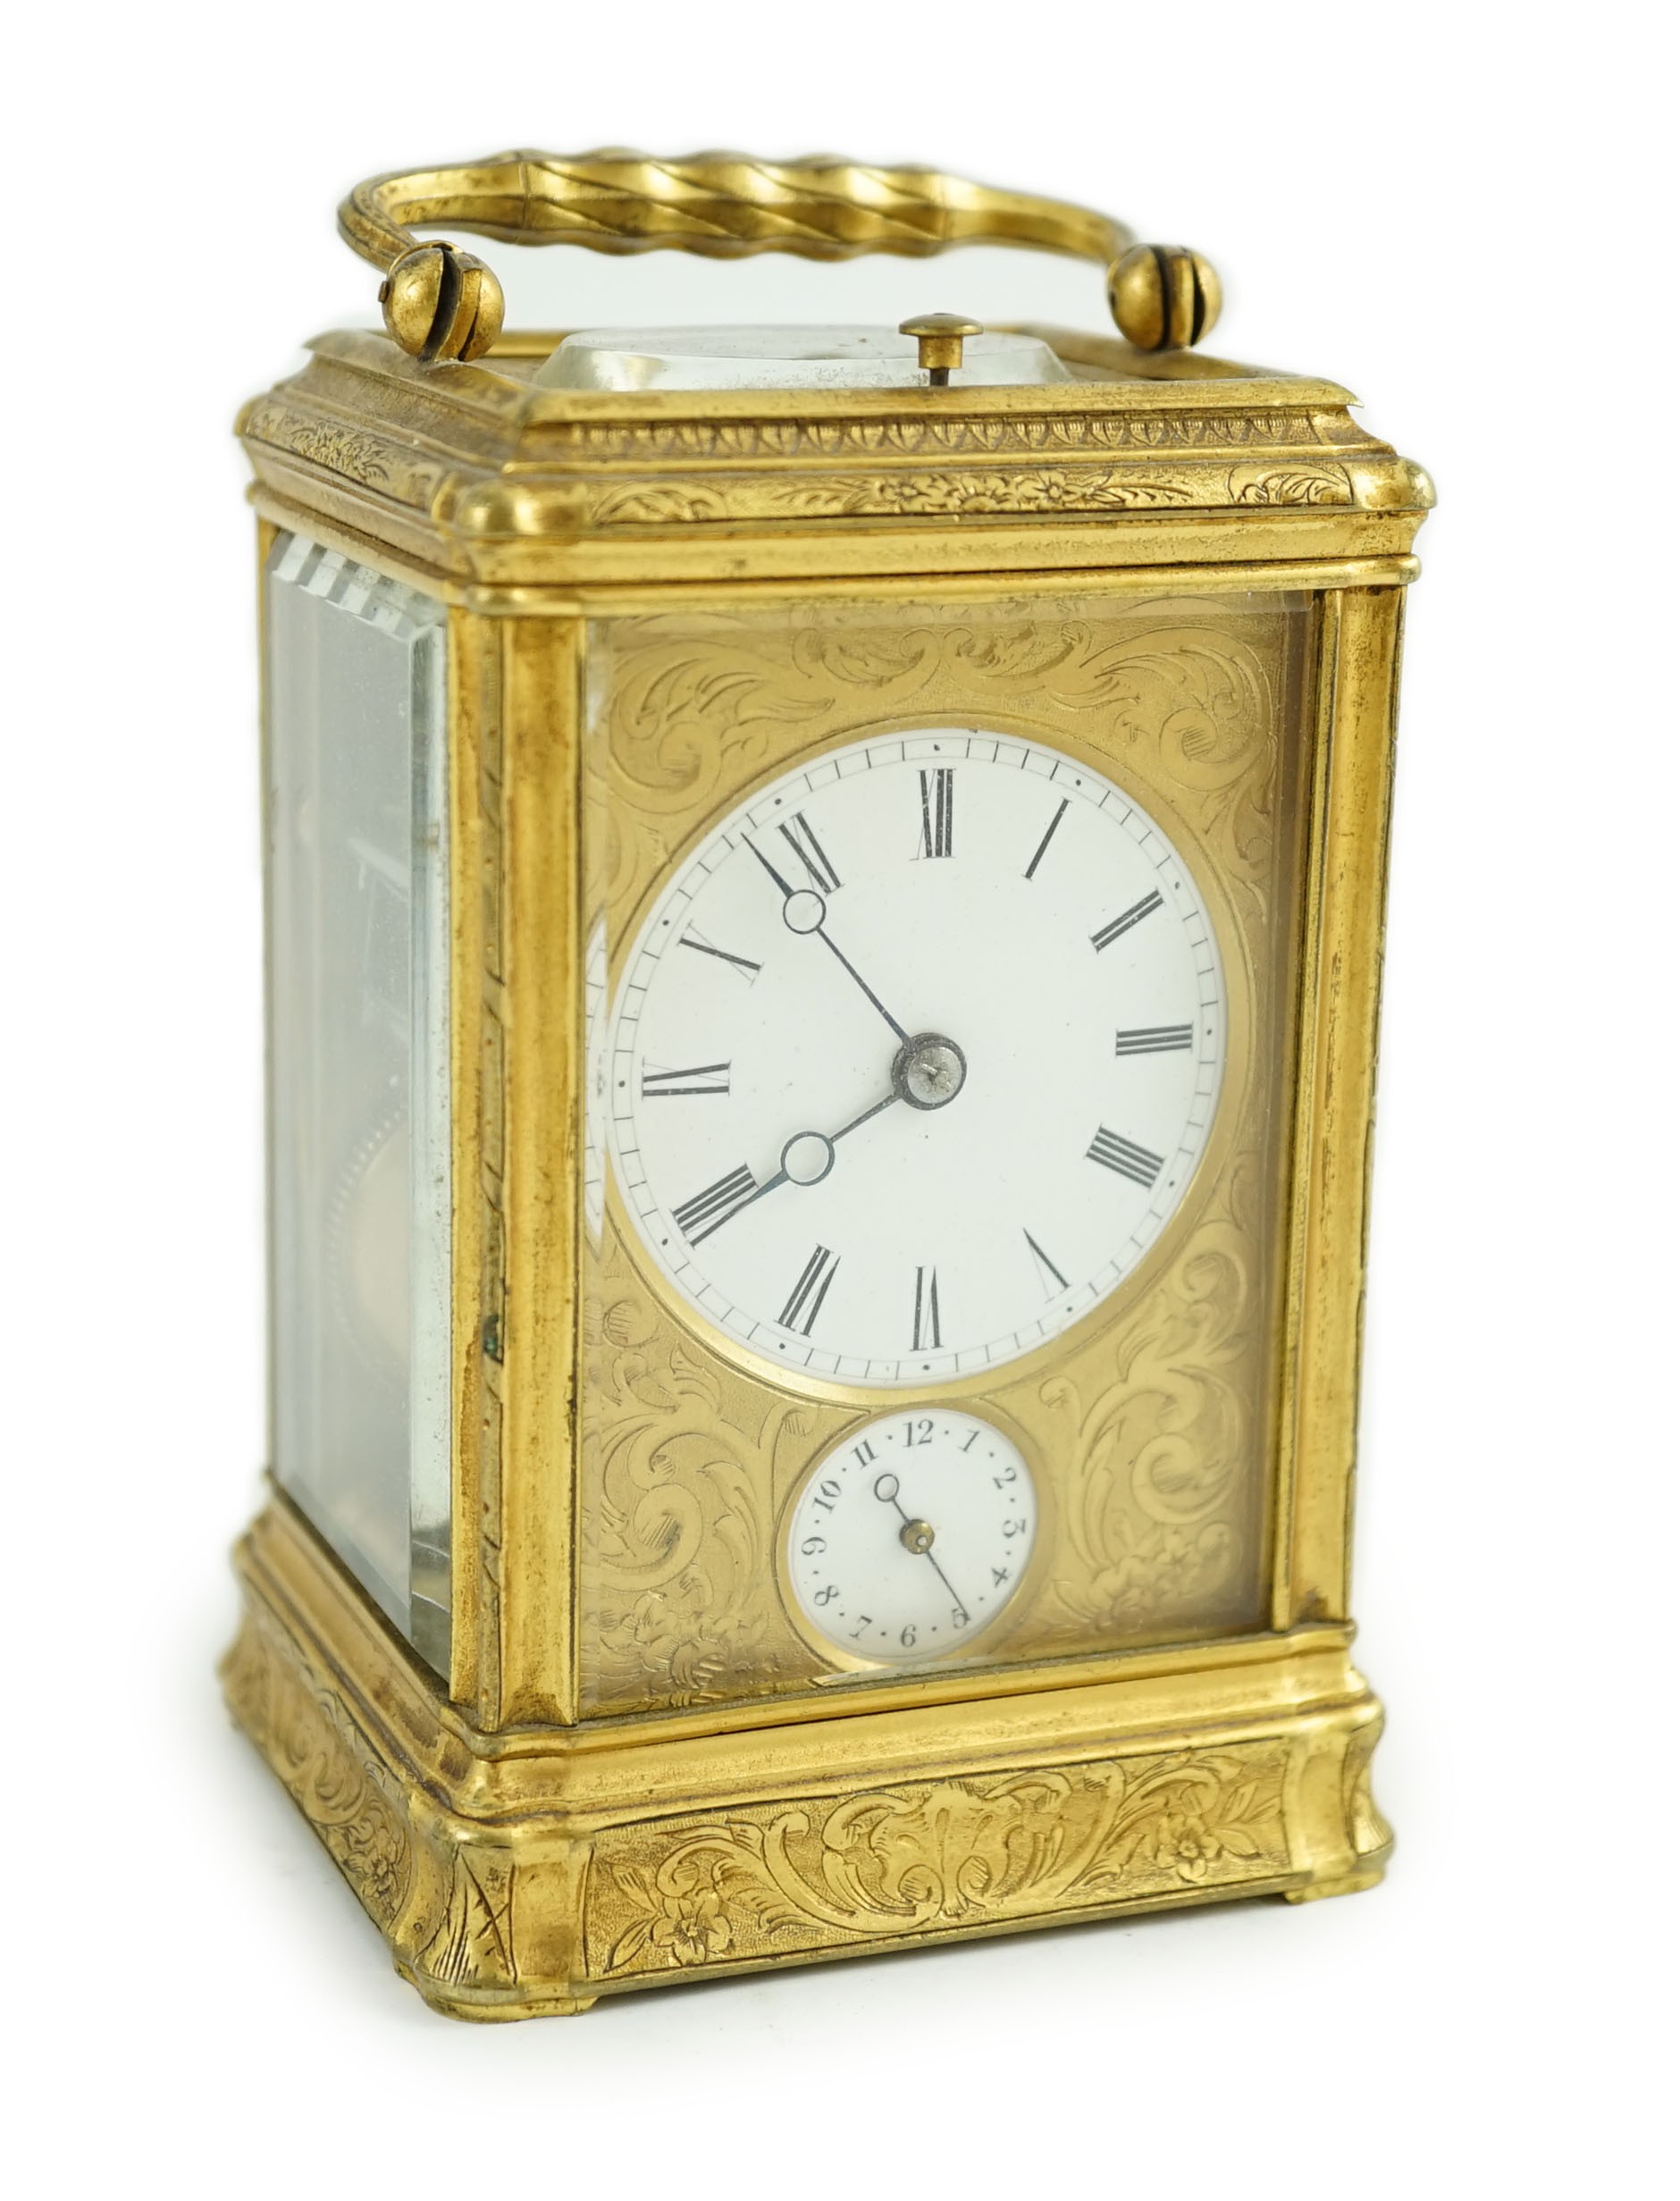 A late 19th century French engraved gilt brass gorge-cased repeating carriage clock with alarm, with - Image 2 of 6